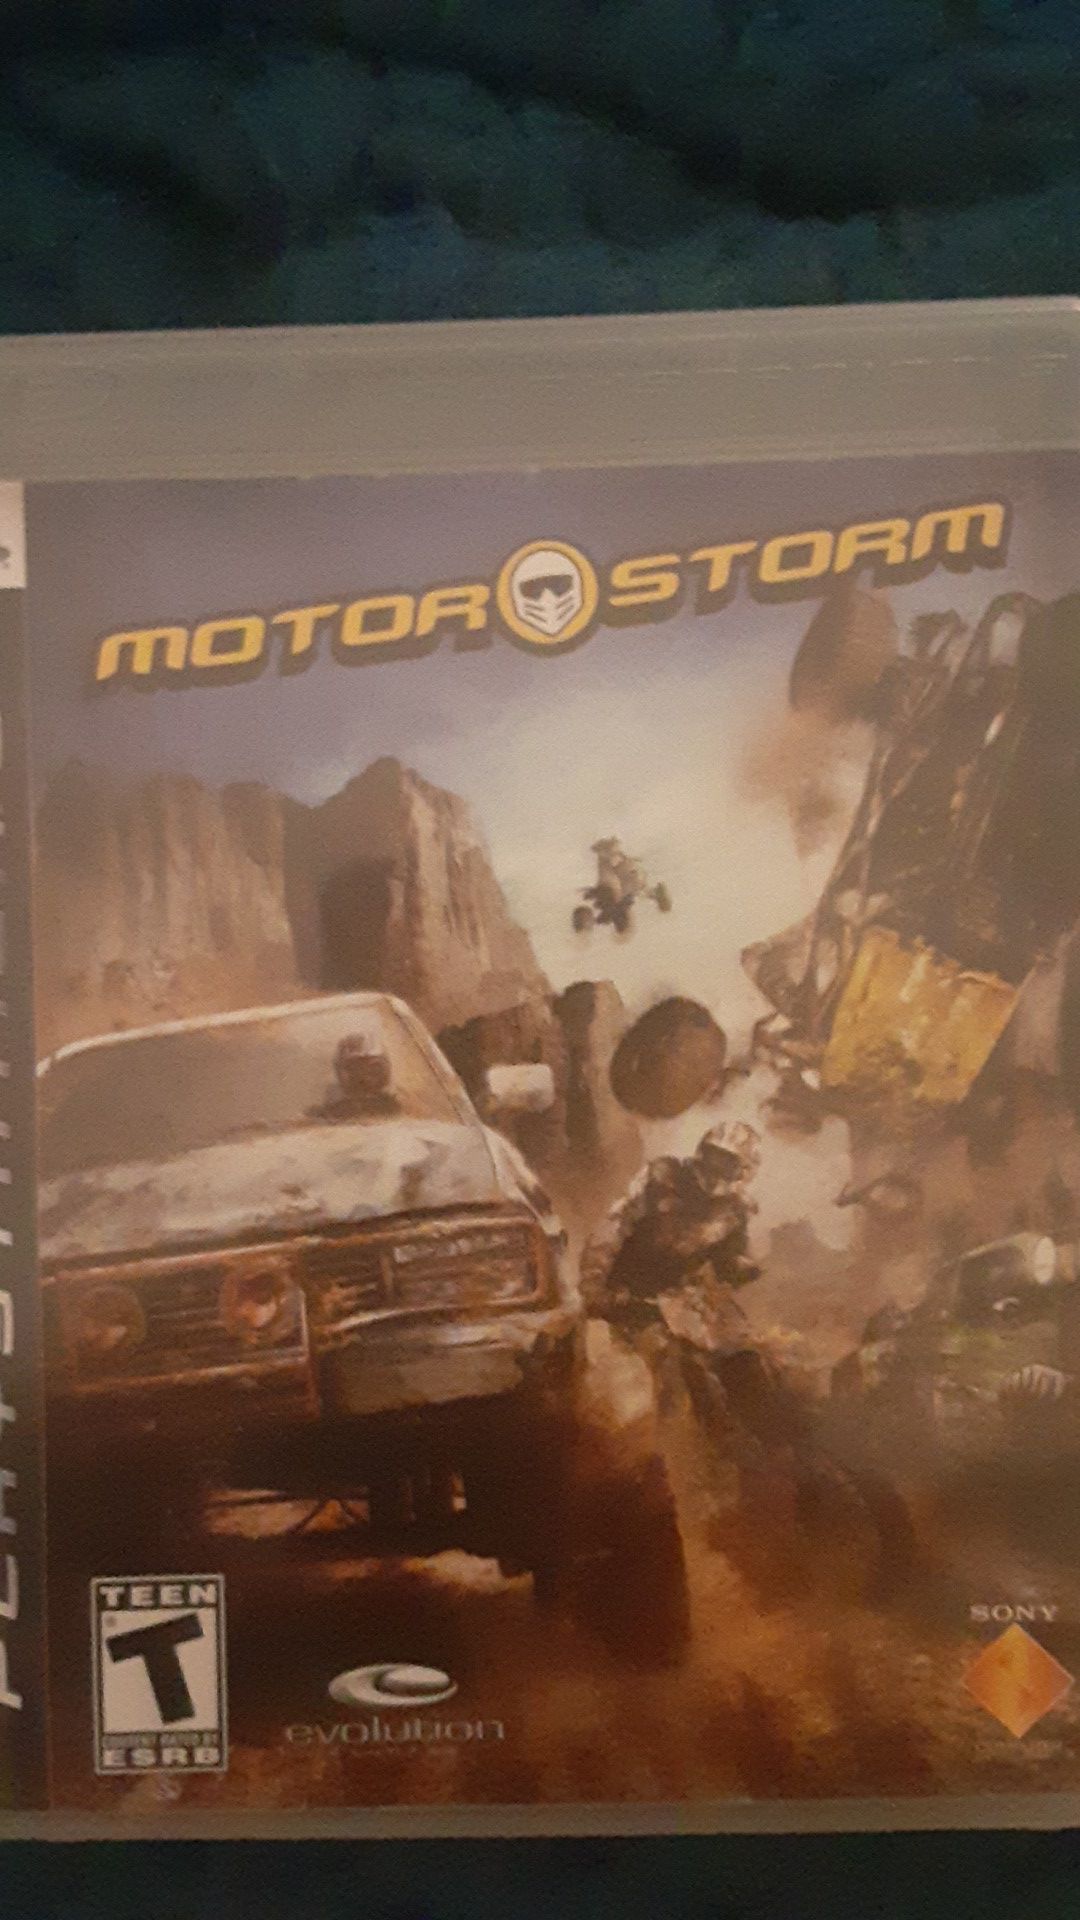 Motor storm & Lego Movie video game PS3